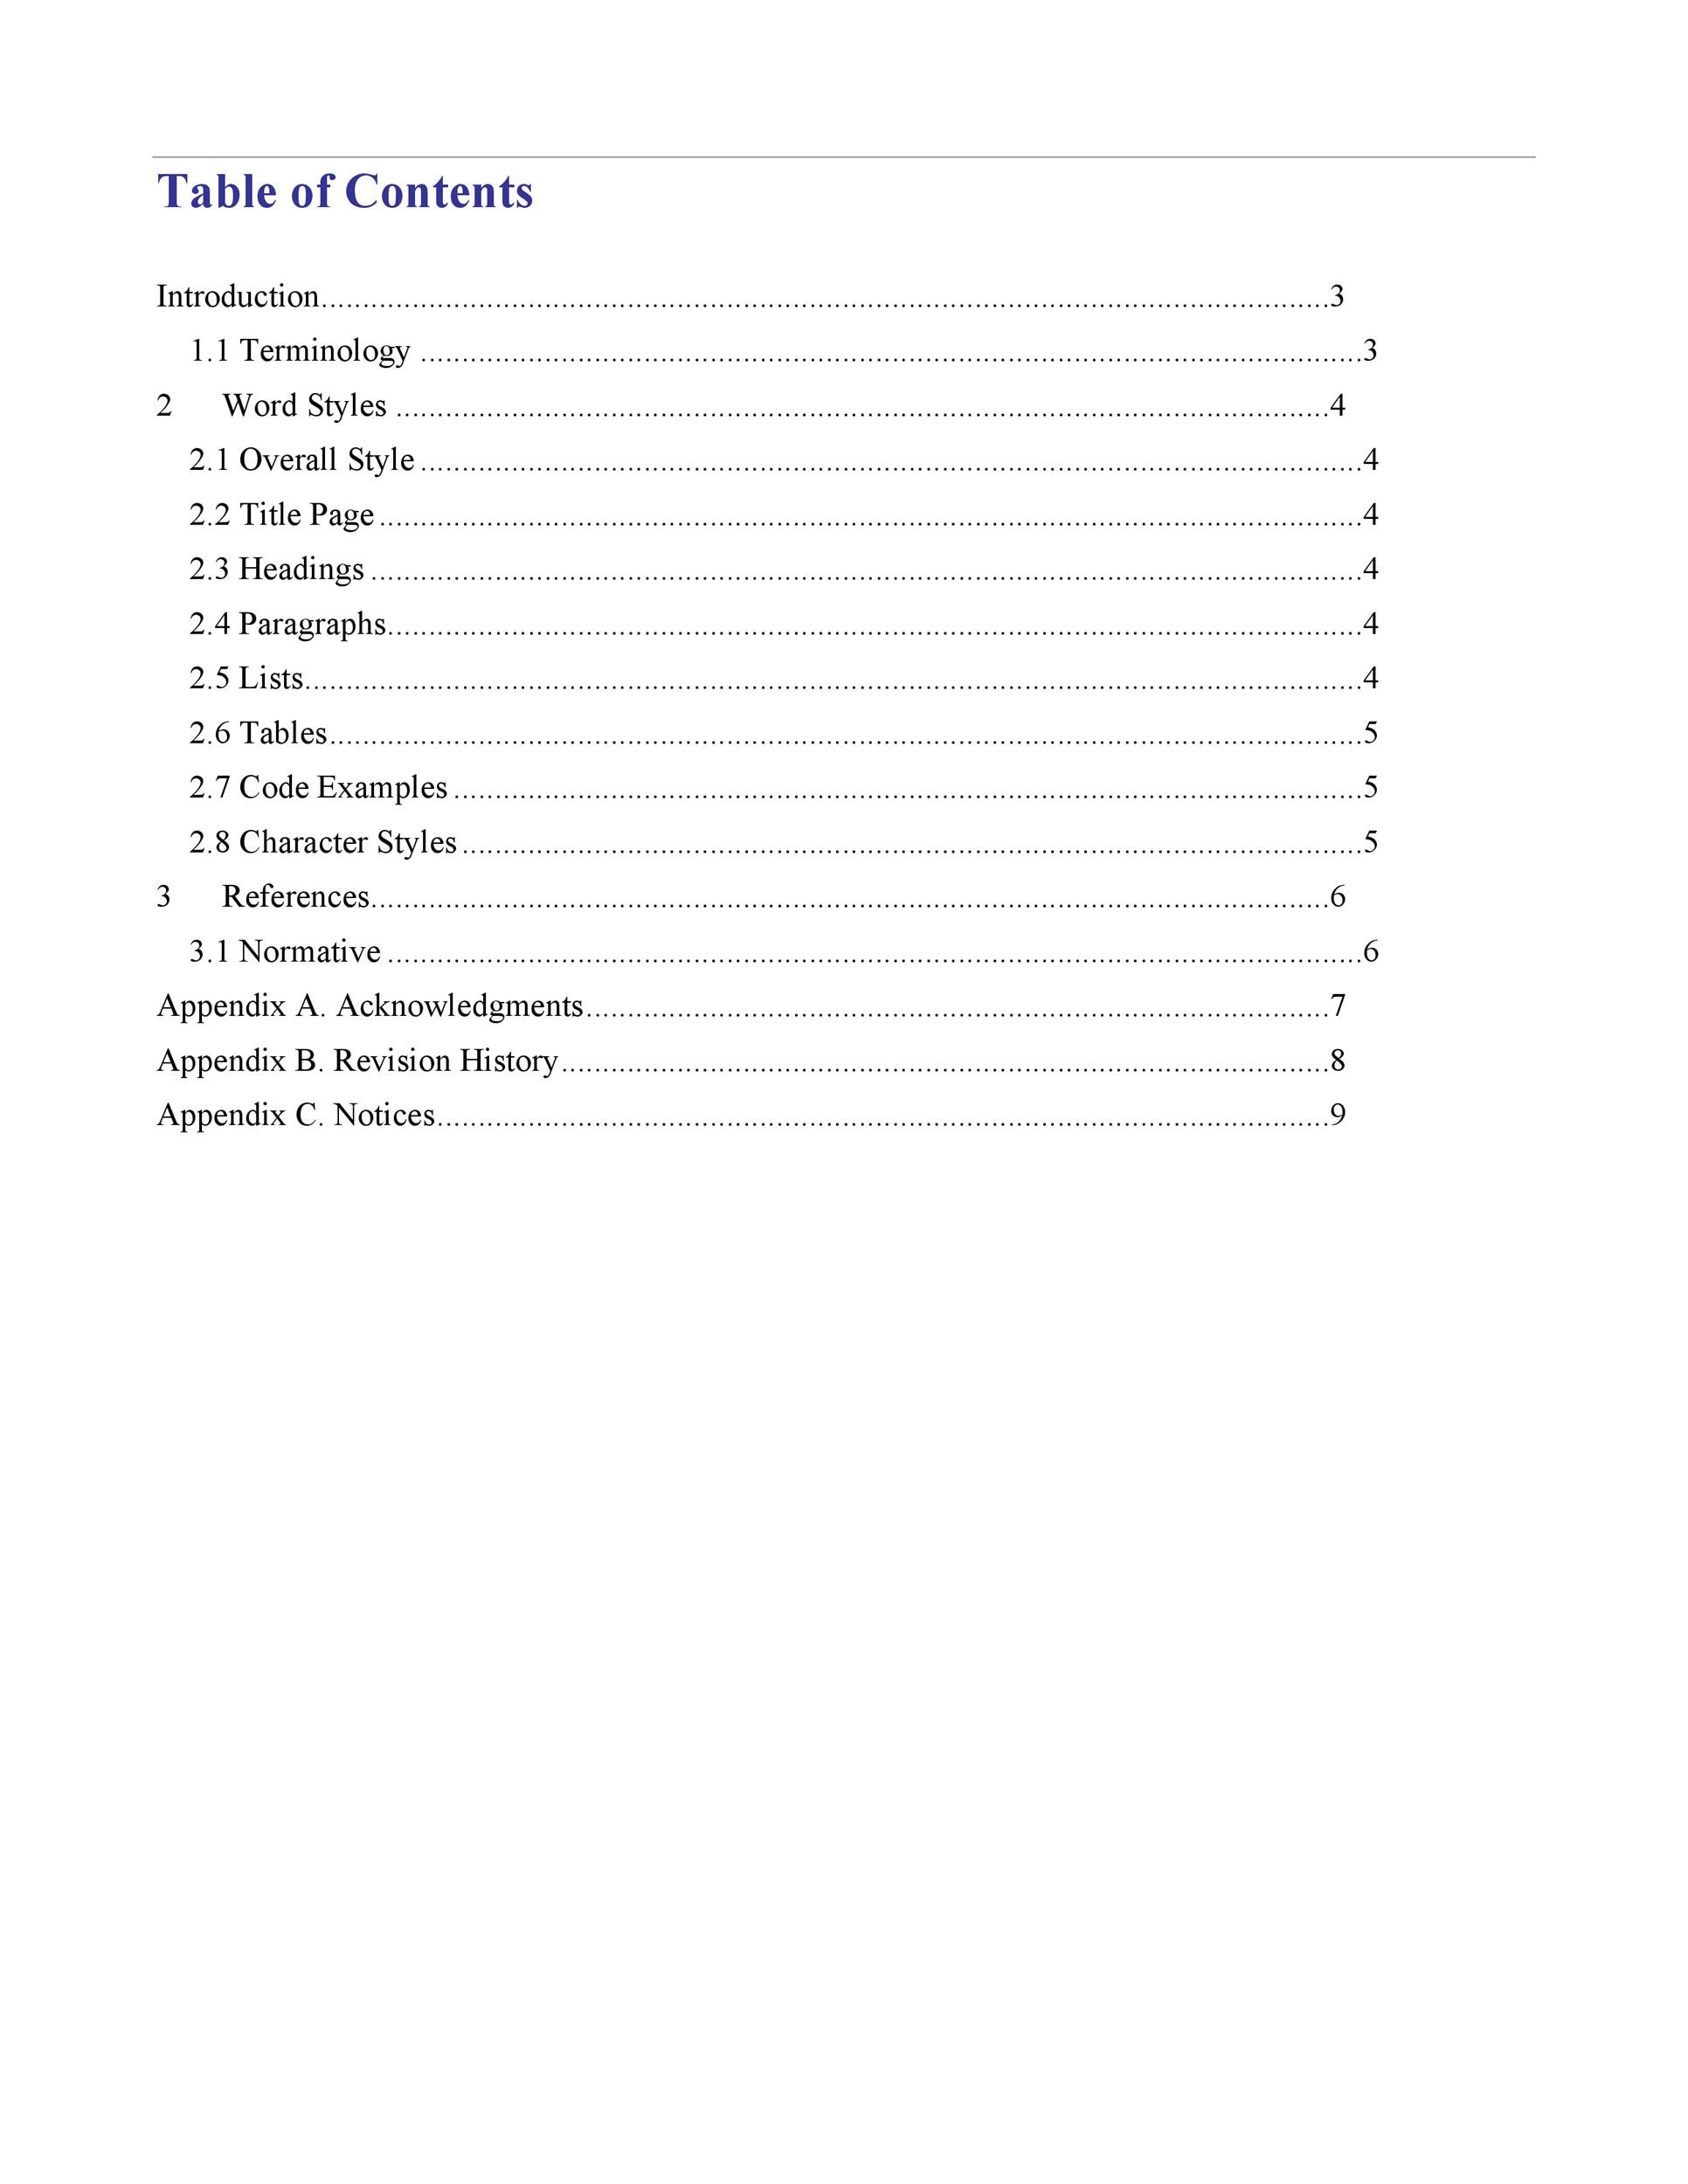 20 Table of Contents Templates and Examples ᐅ TemplateLab